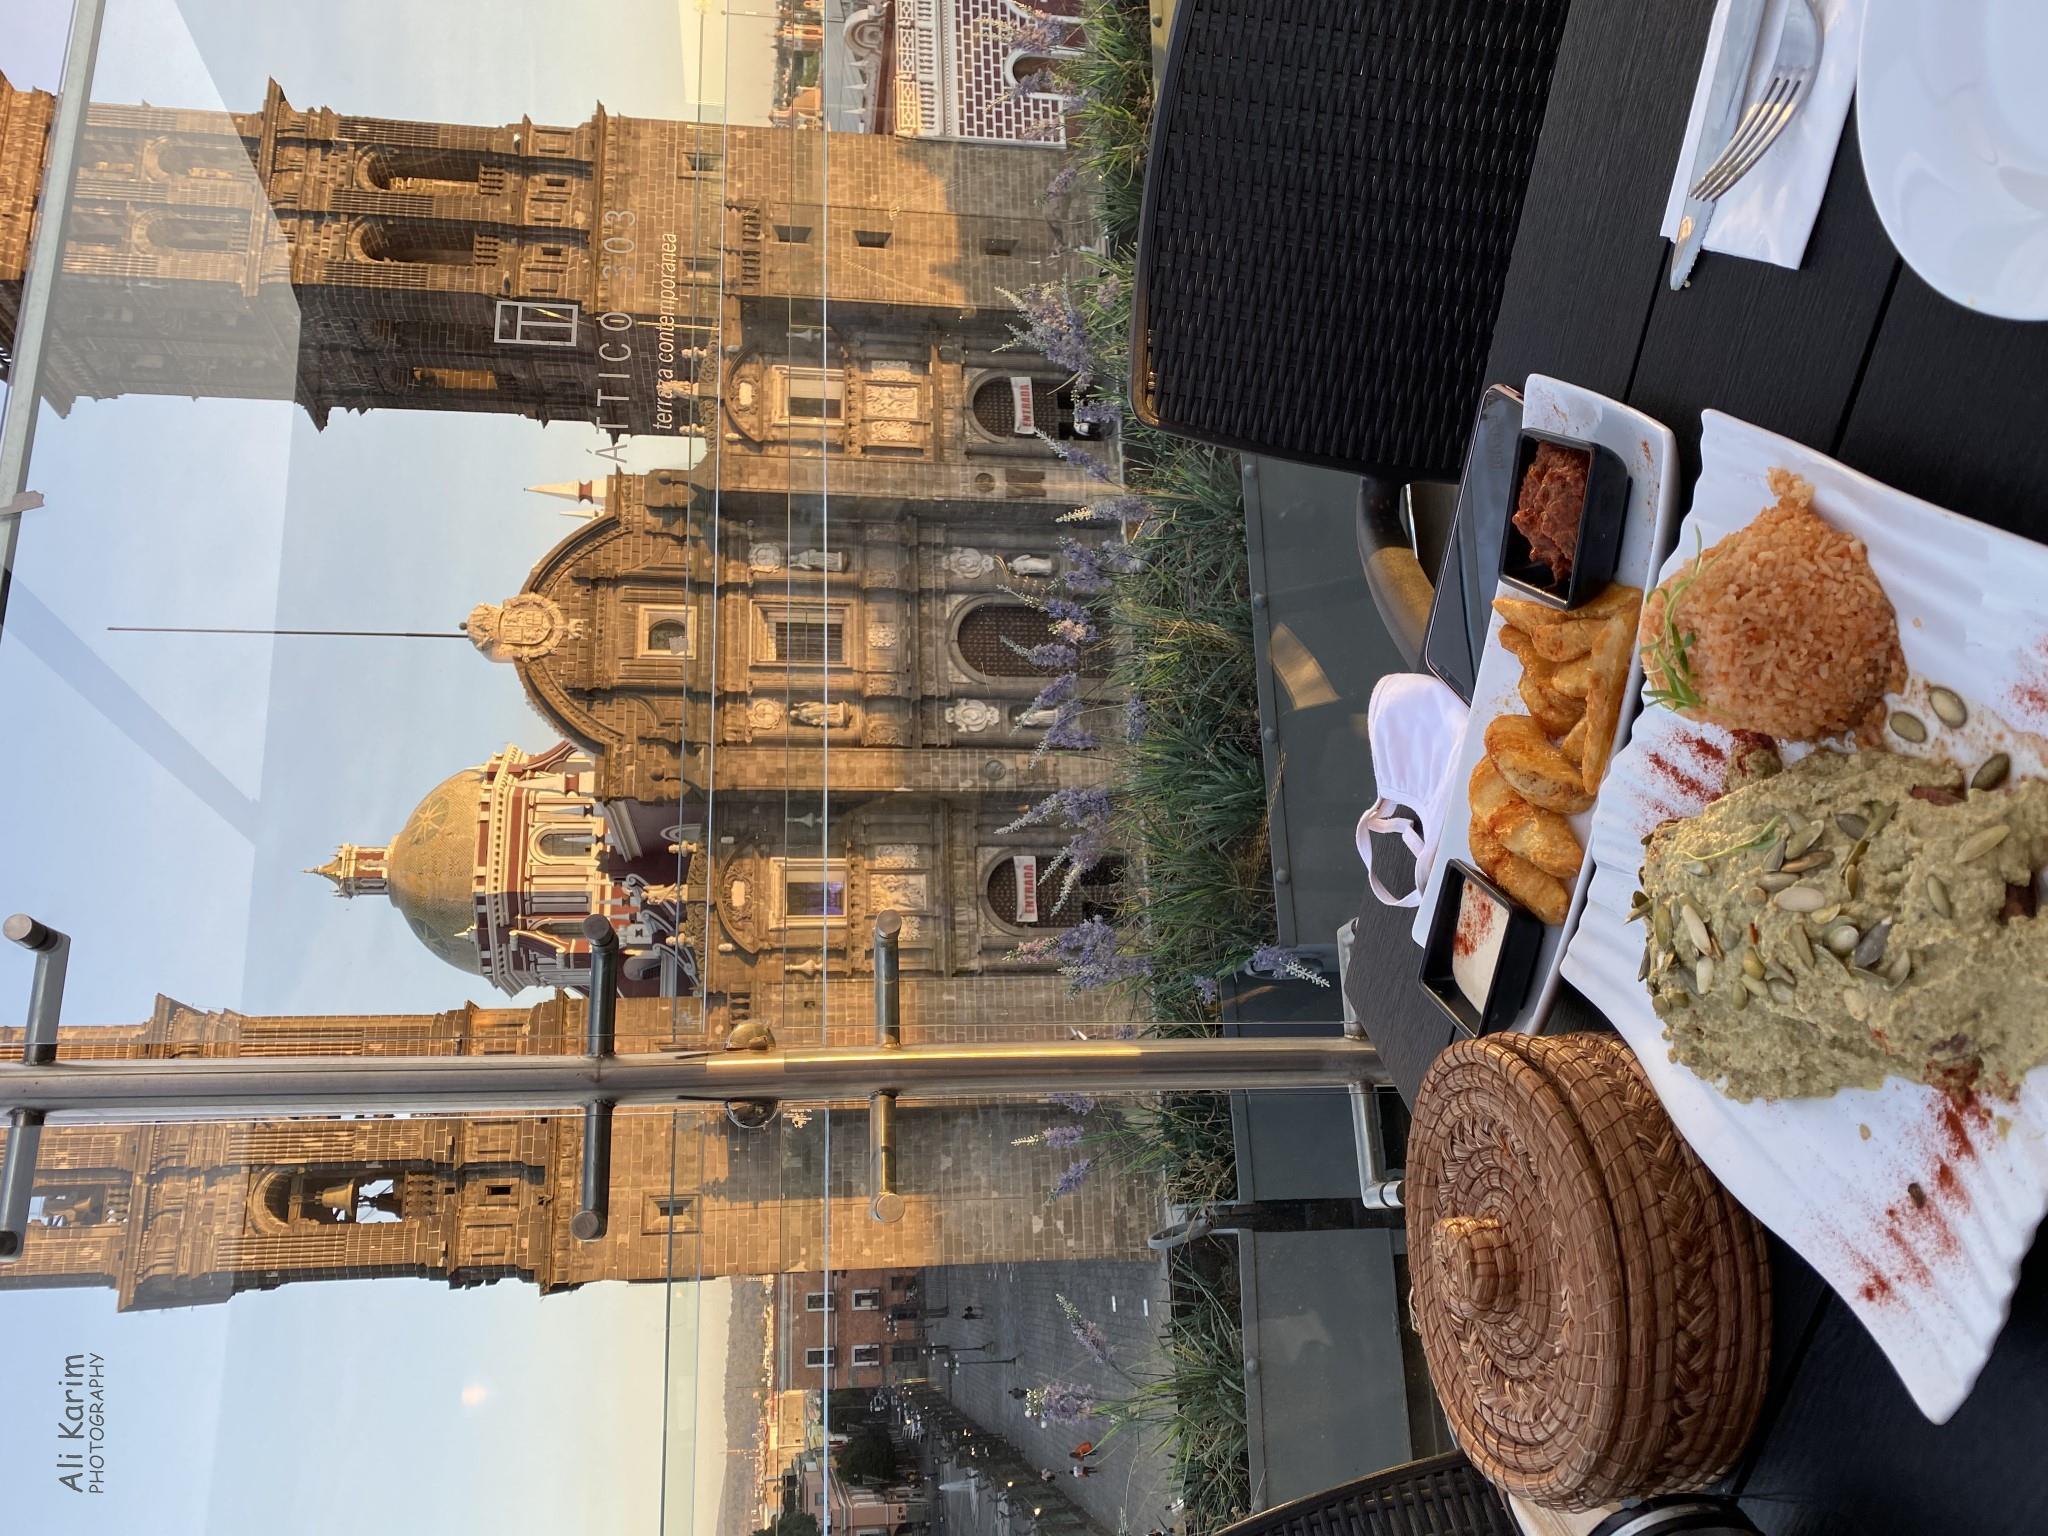 Puebla, Mexico Dec 2020, Rooftop restaurant in the zocalo with a great view of the Cathedral. Again, note the food, presentation, plates etc